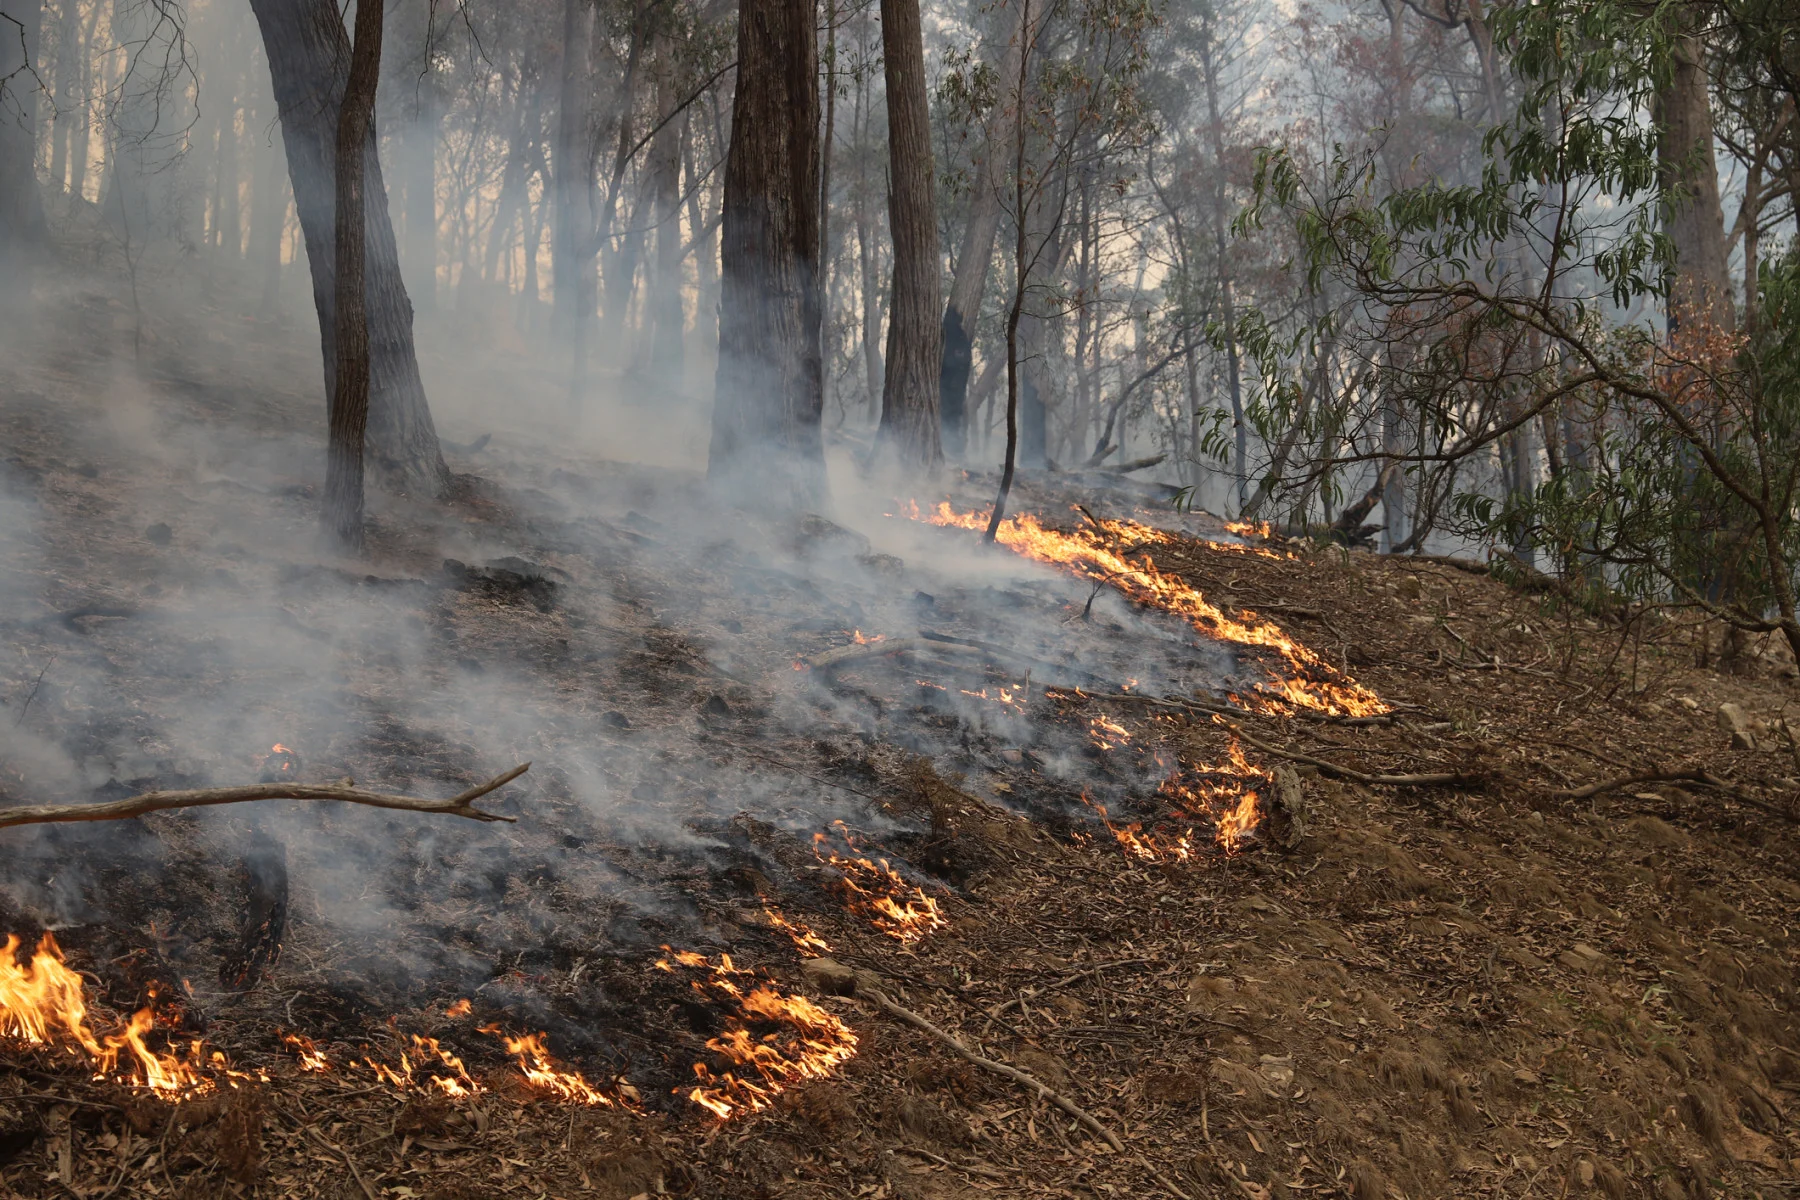 A burning forest during the historic bushfire season in Australia from 2019 to 2020. (Thomas Hogg/ iStock /Getty Images Plus)